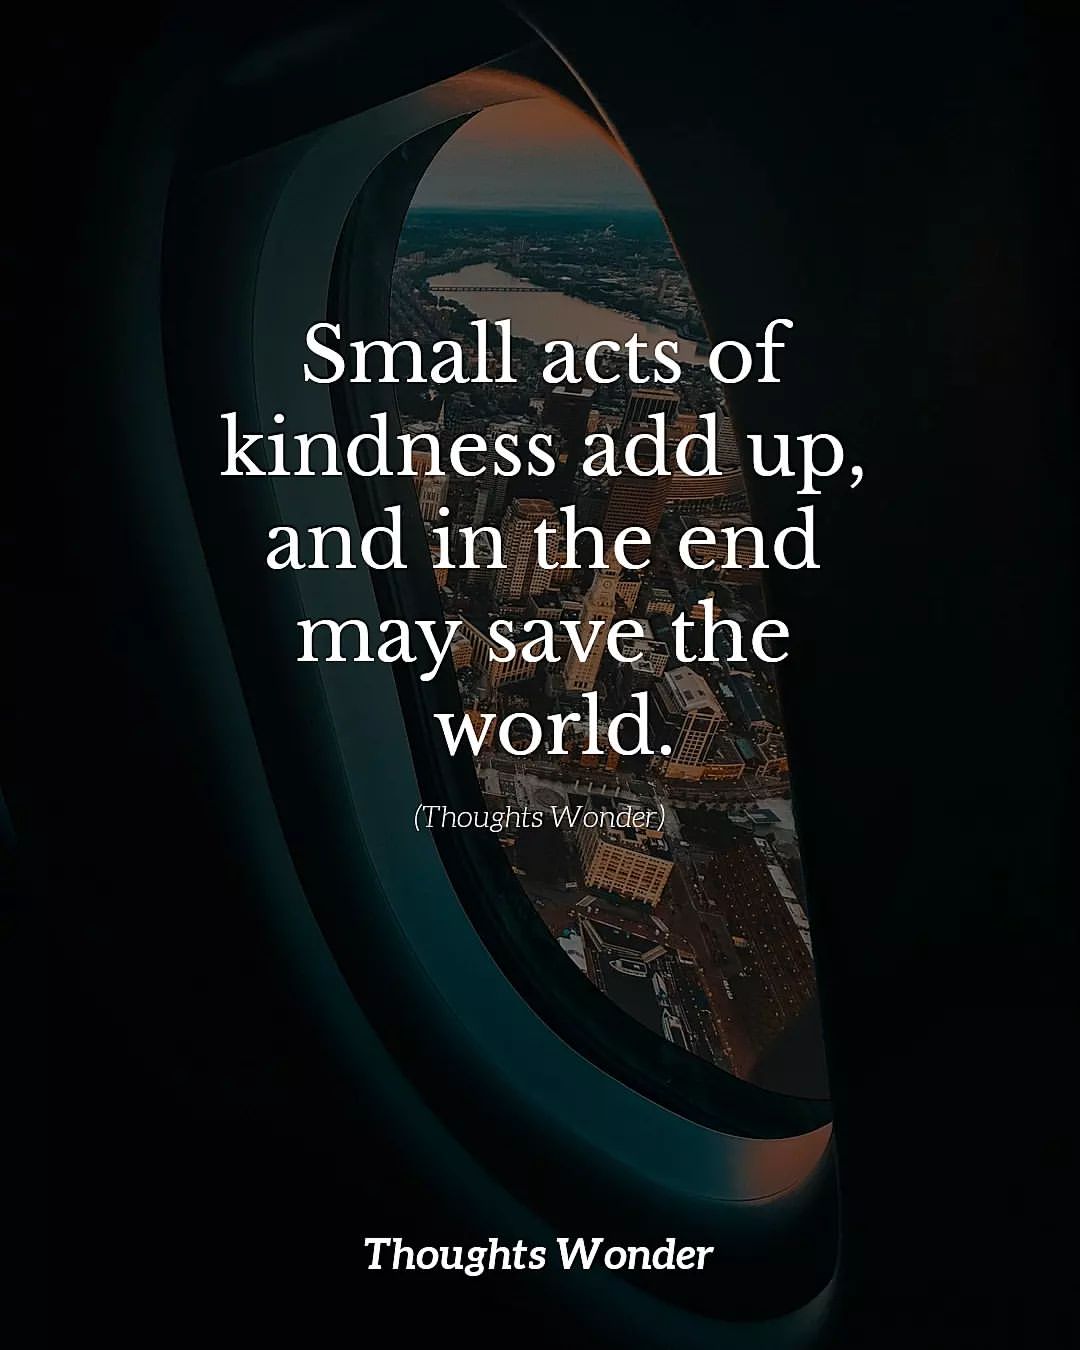 Small acts of kindness add up, and in the end may save the world.